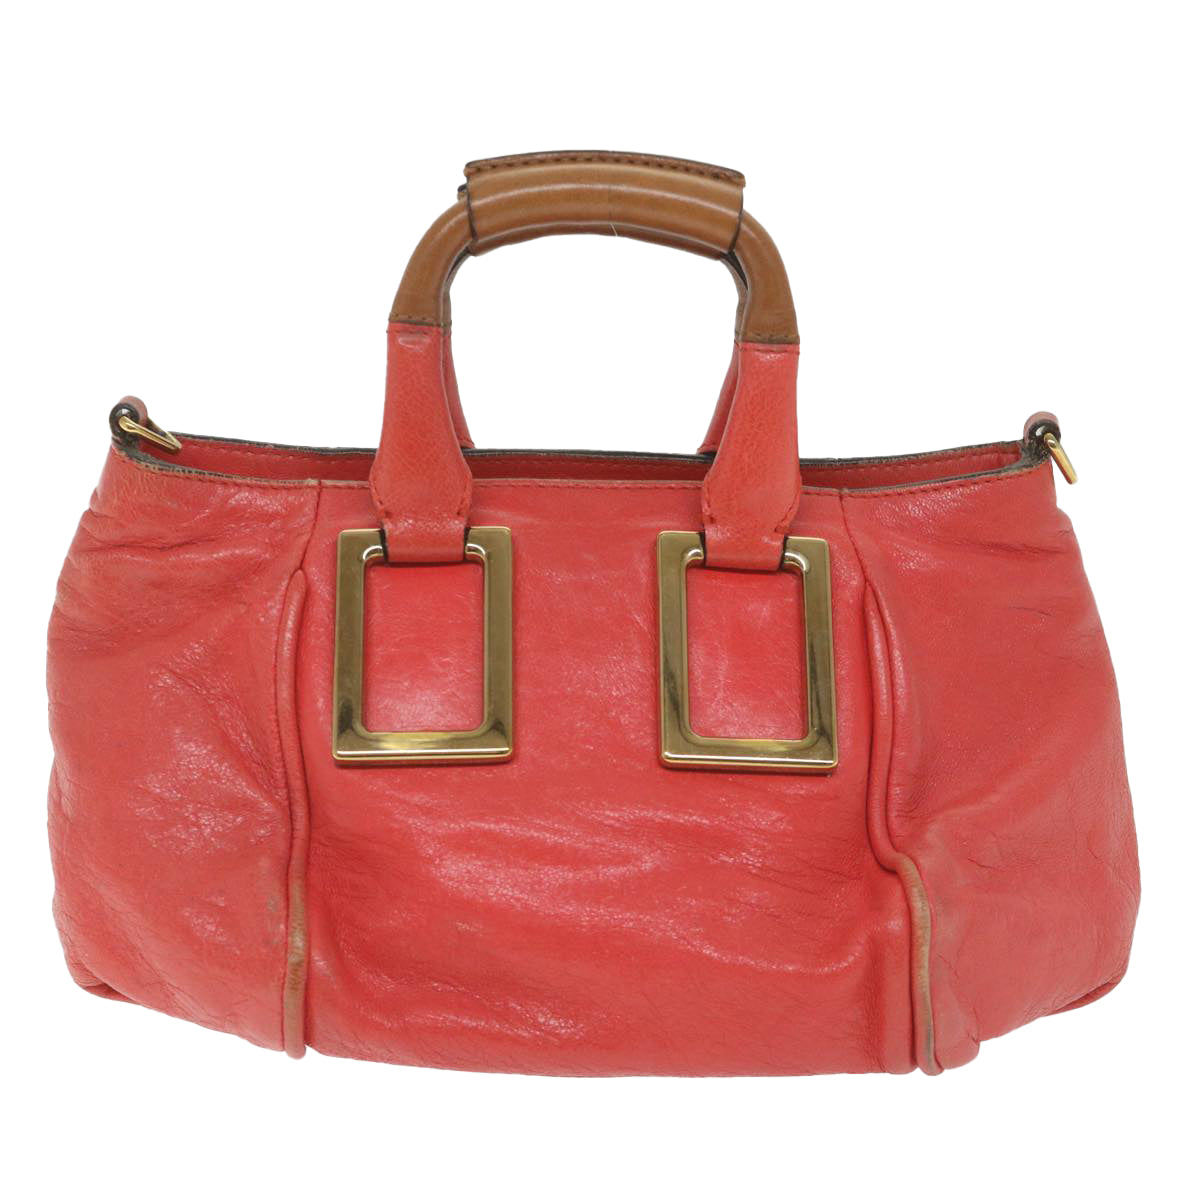 Chloe Etel Hand Bag Leather 2way Red 01 12 50 65 Auth ar10713 - 0